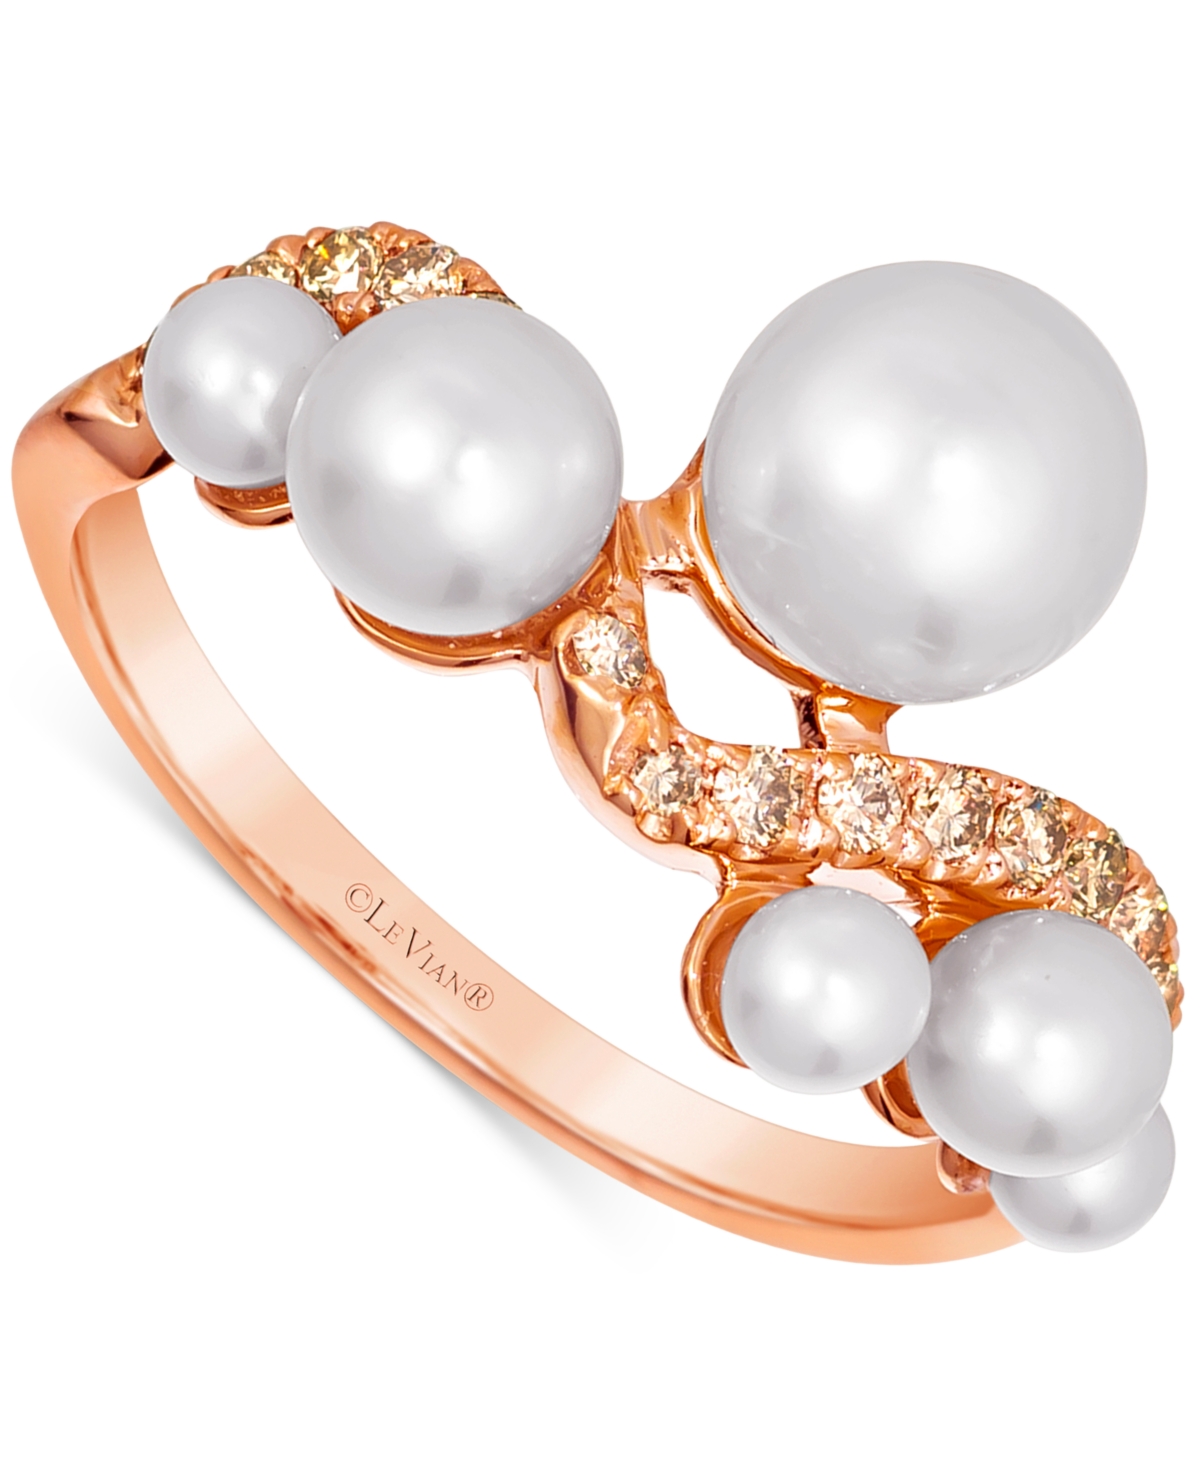 Le Vian Vanilla Pearls (3-8mm) & Nude Diamond (3/8 Ct. T.w.) Wavy Ring In 14k Rose Gold In K Strawberry Gold Ring